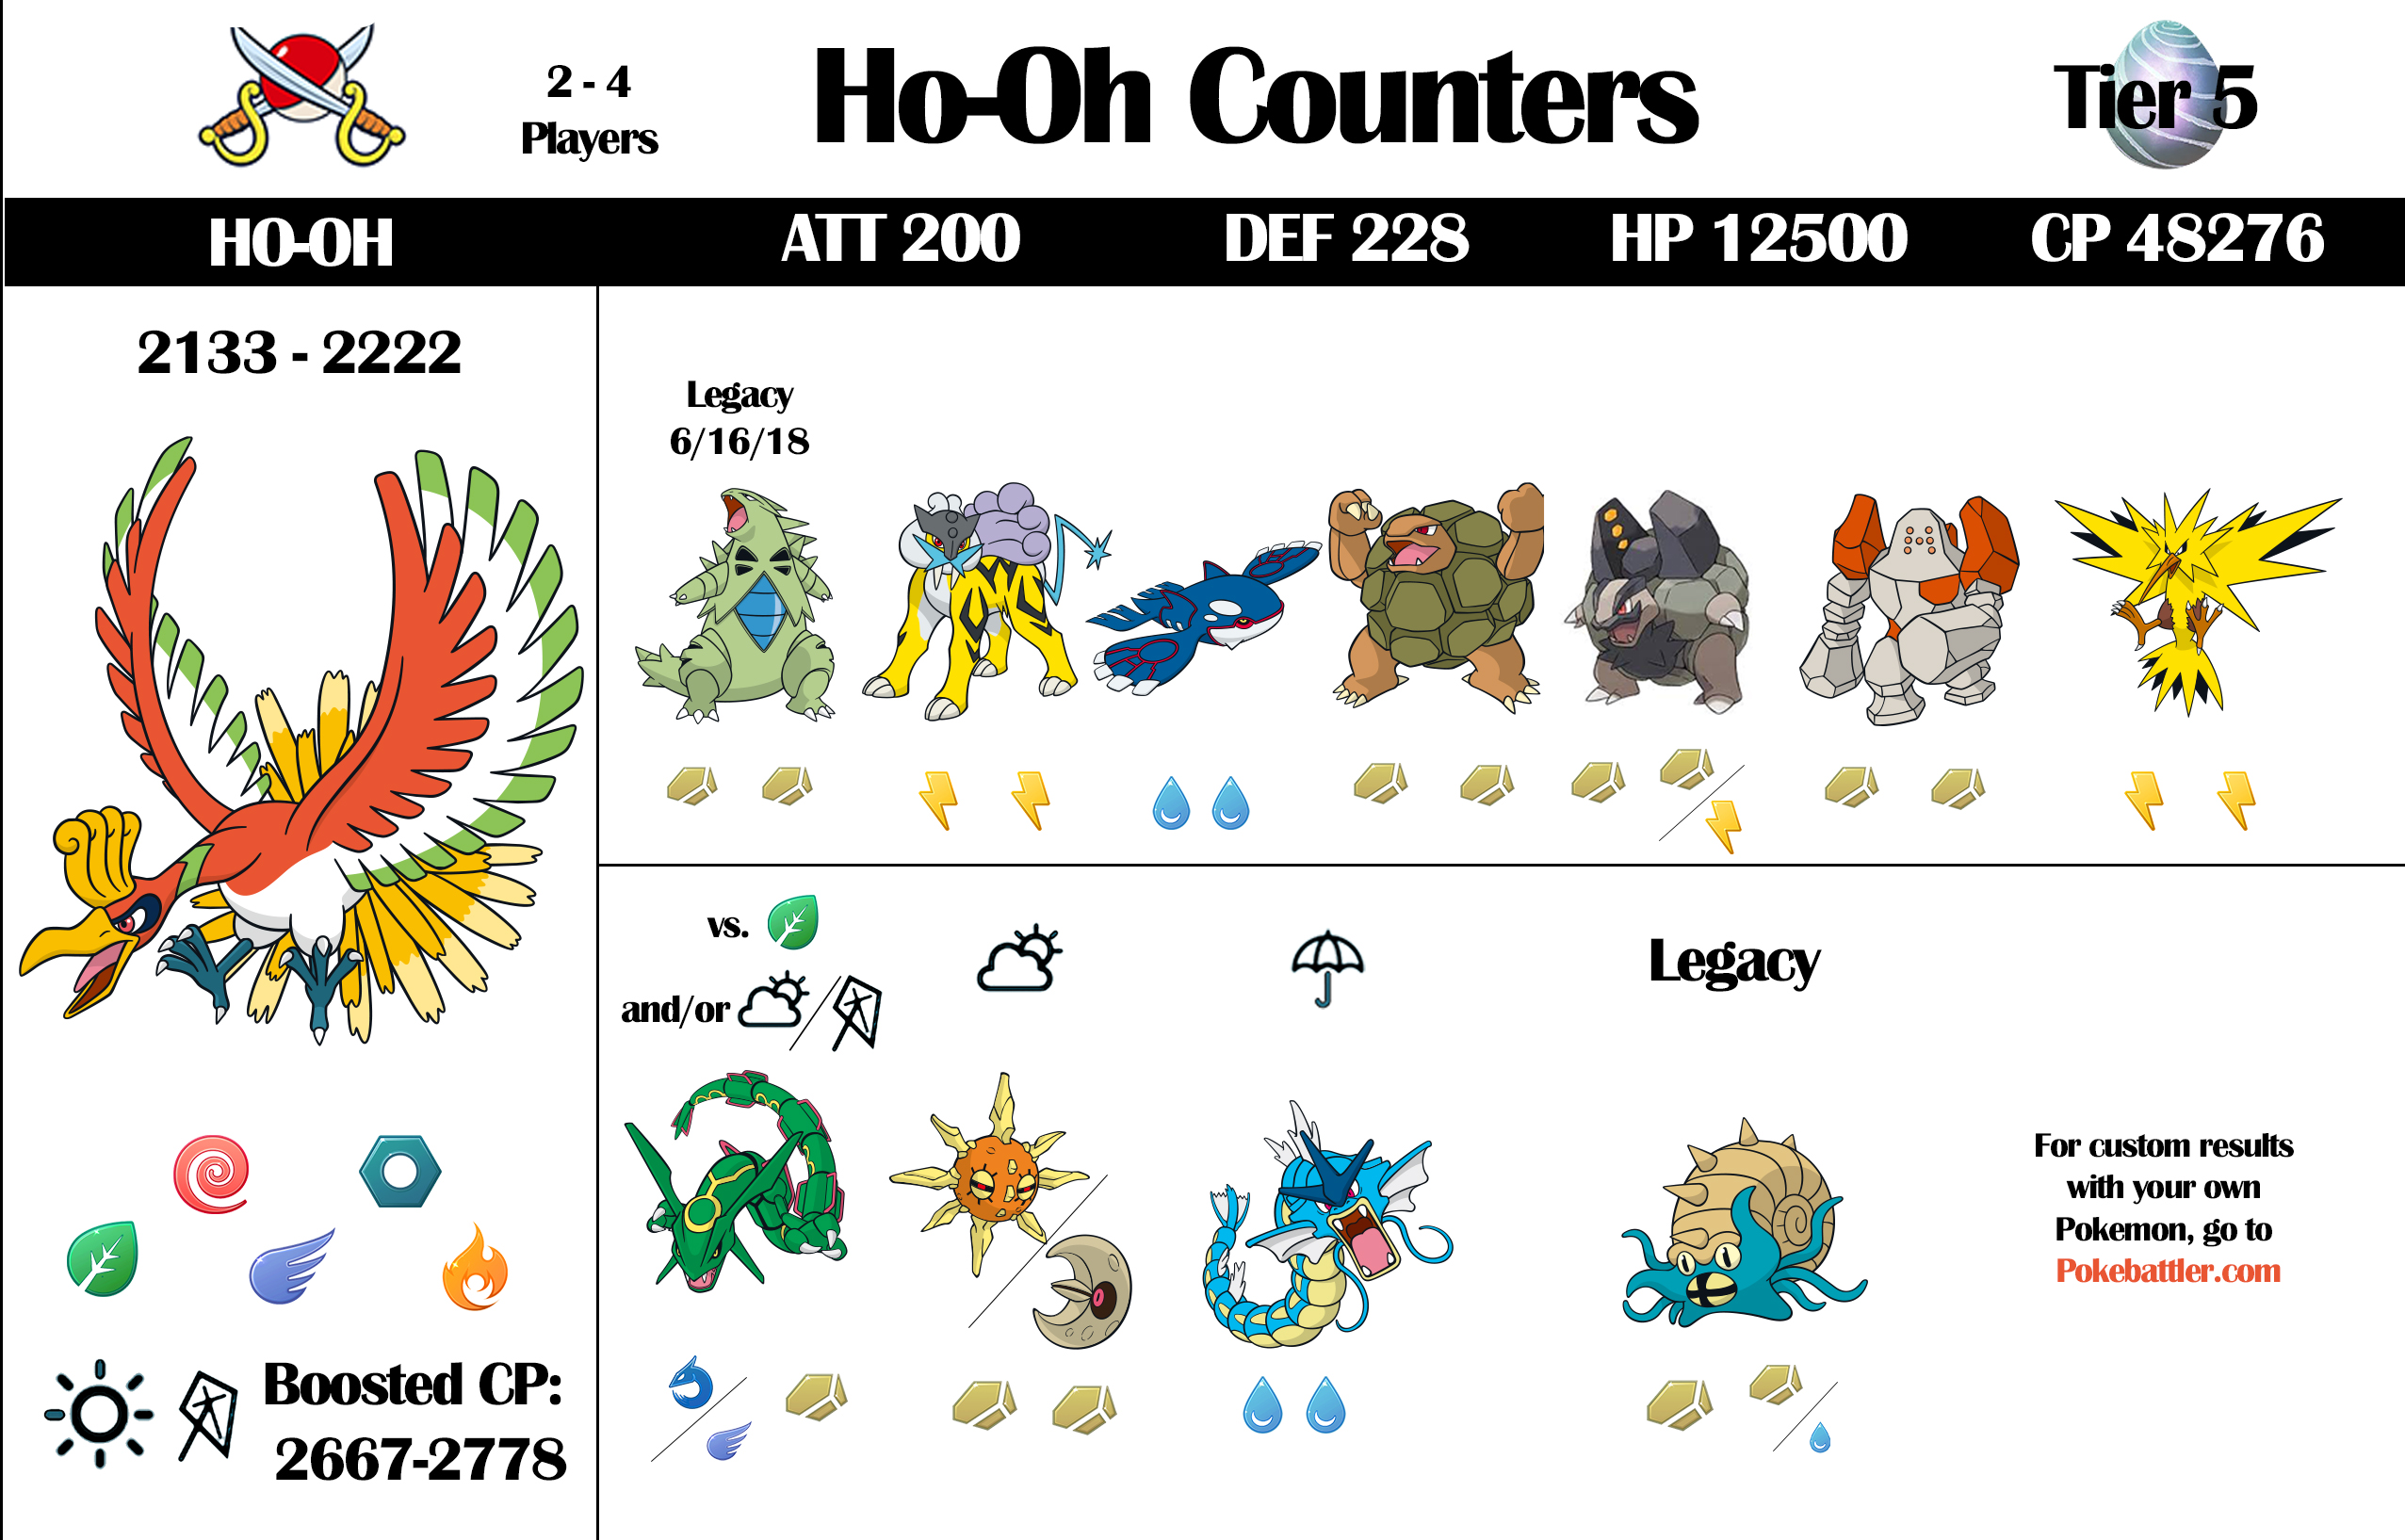 How GOOD was Ho-Oh ACTUALLY? - History of Ho-Oh in Competitive